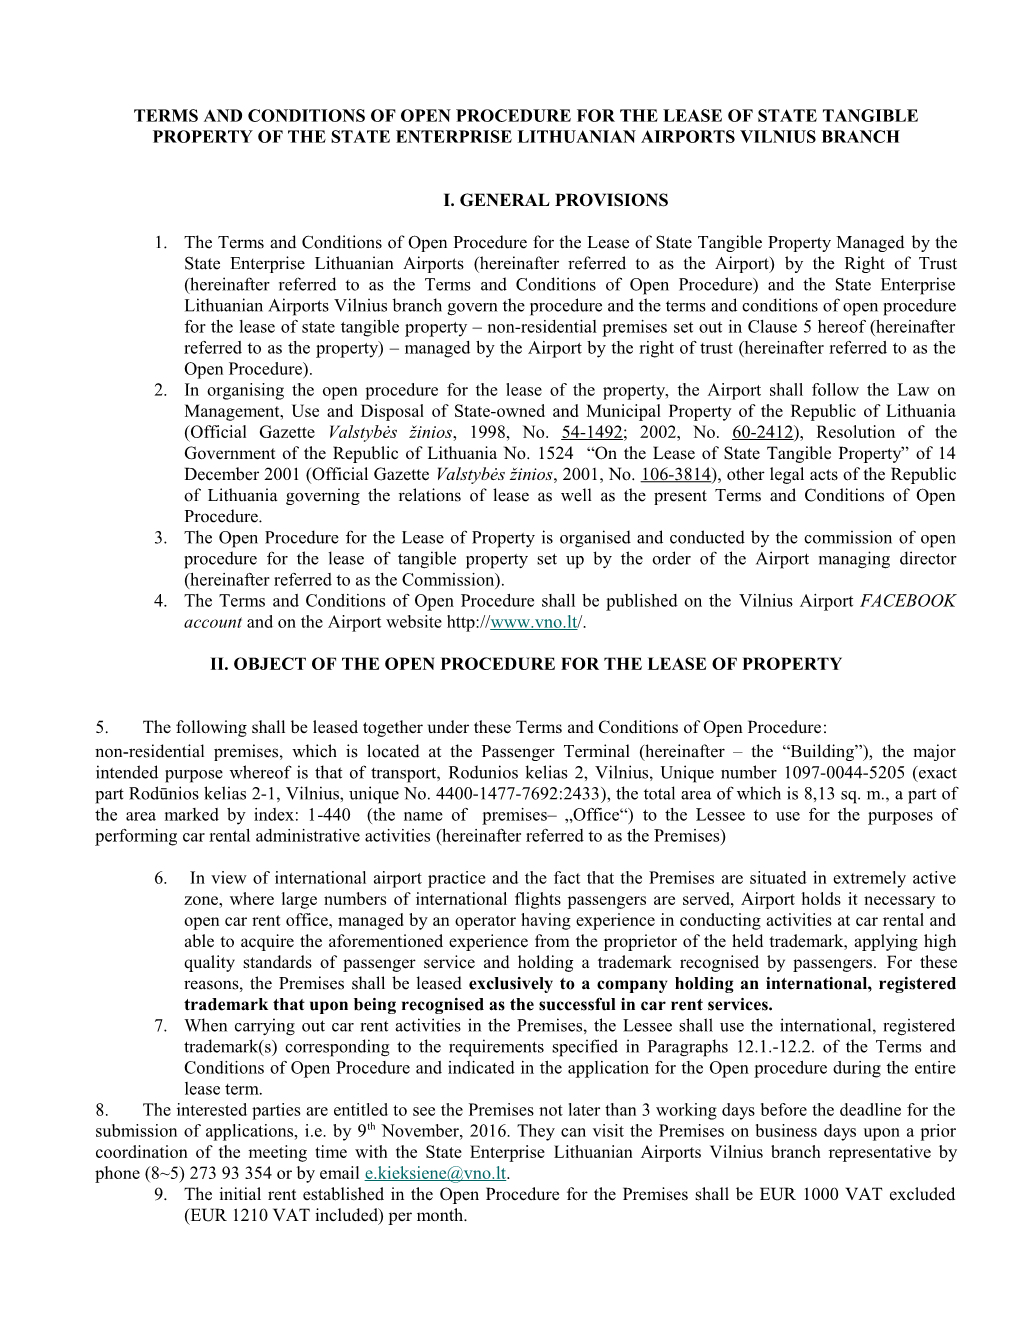 Terms and Conditions of Open Procedure for the Lease of State Tangible Property of The